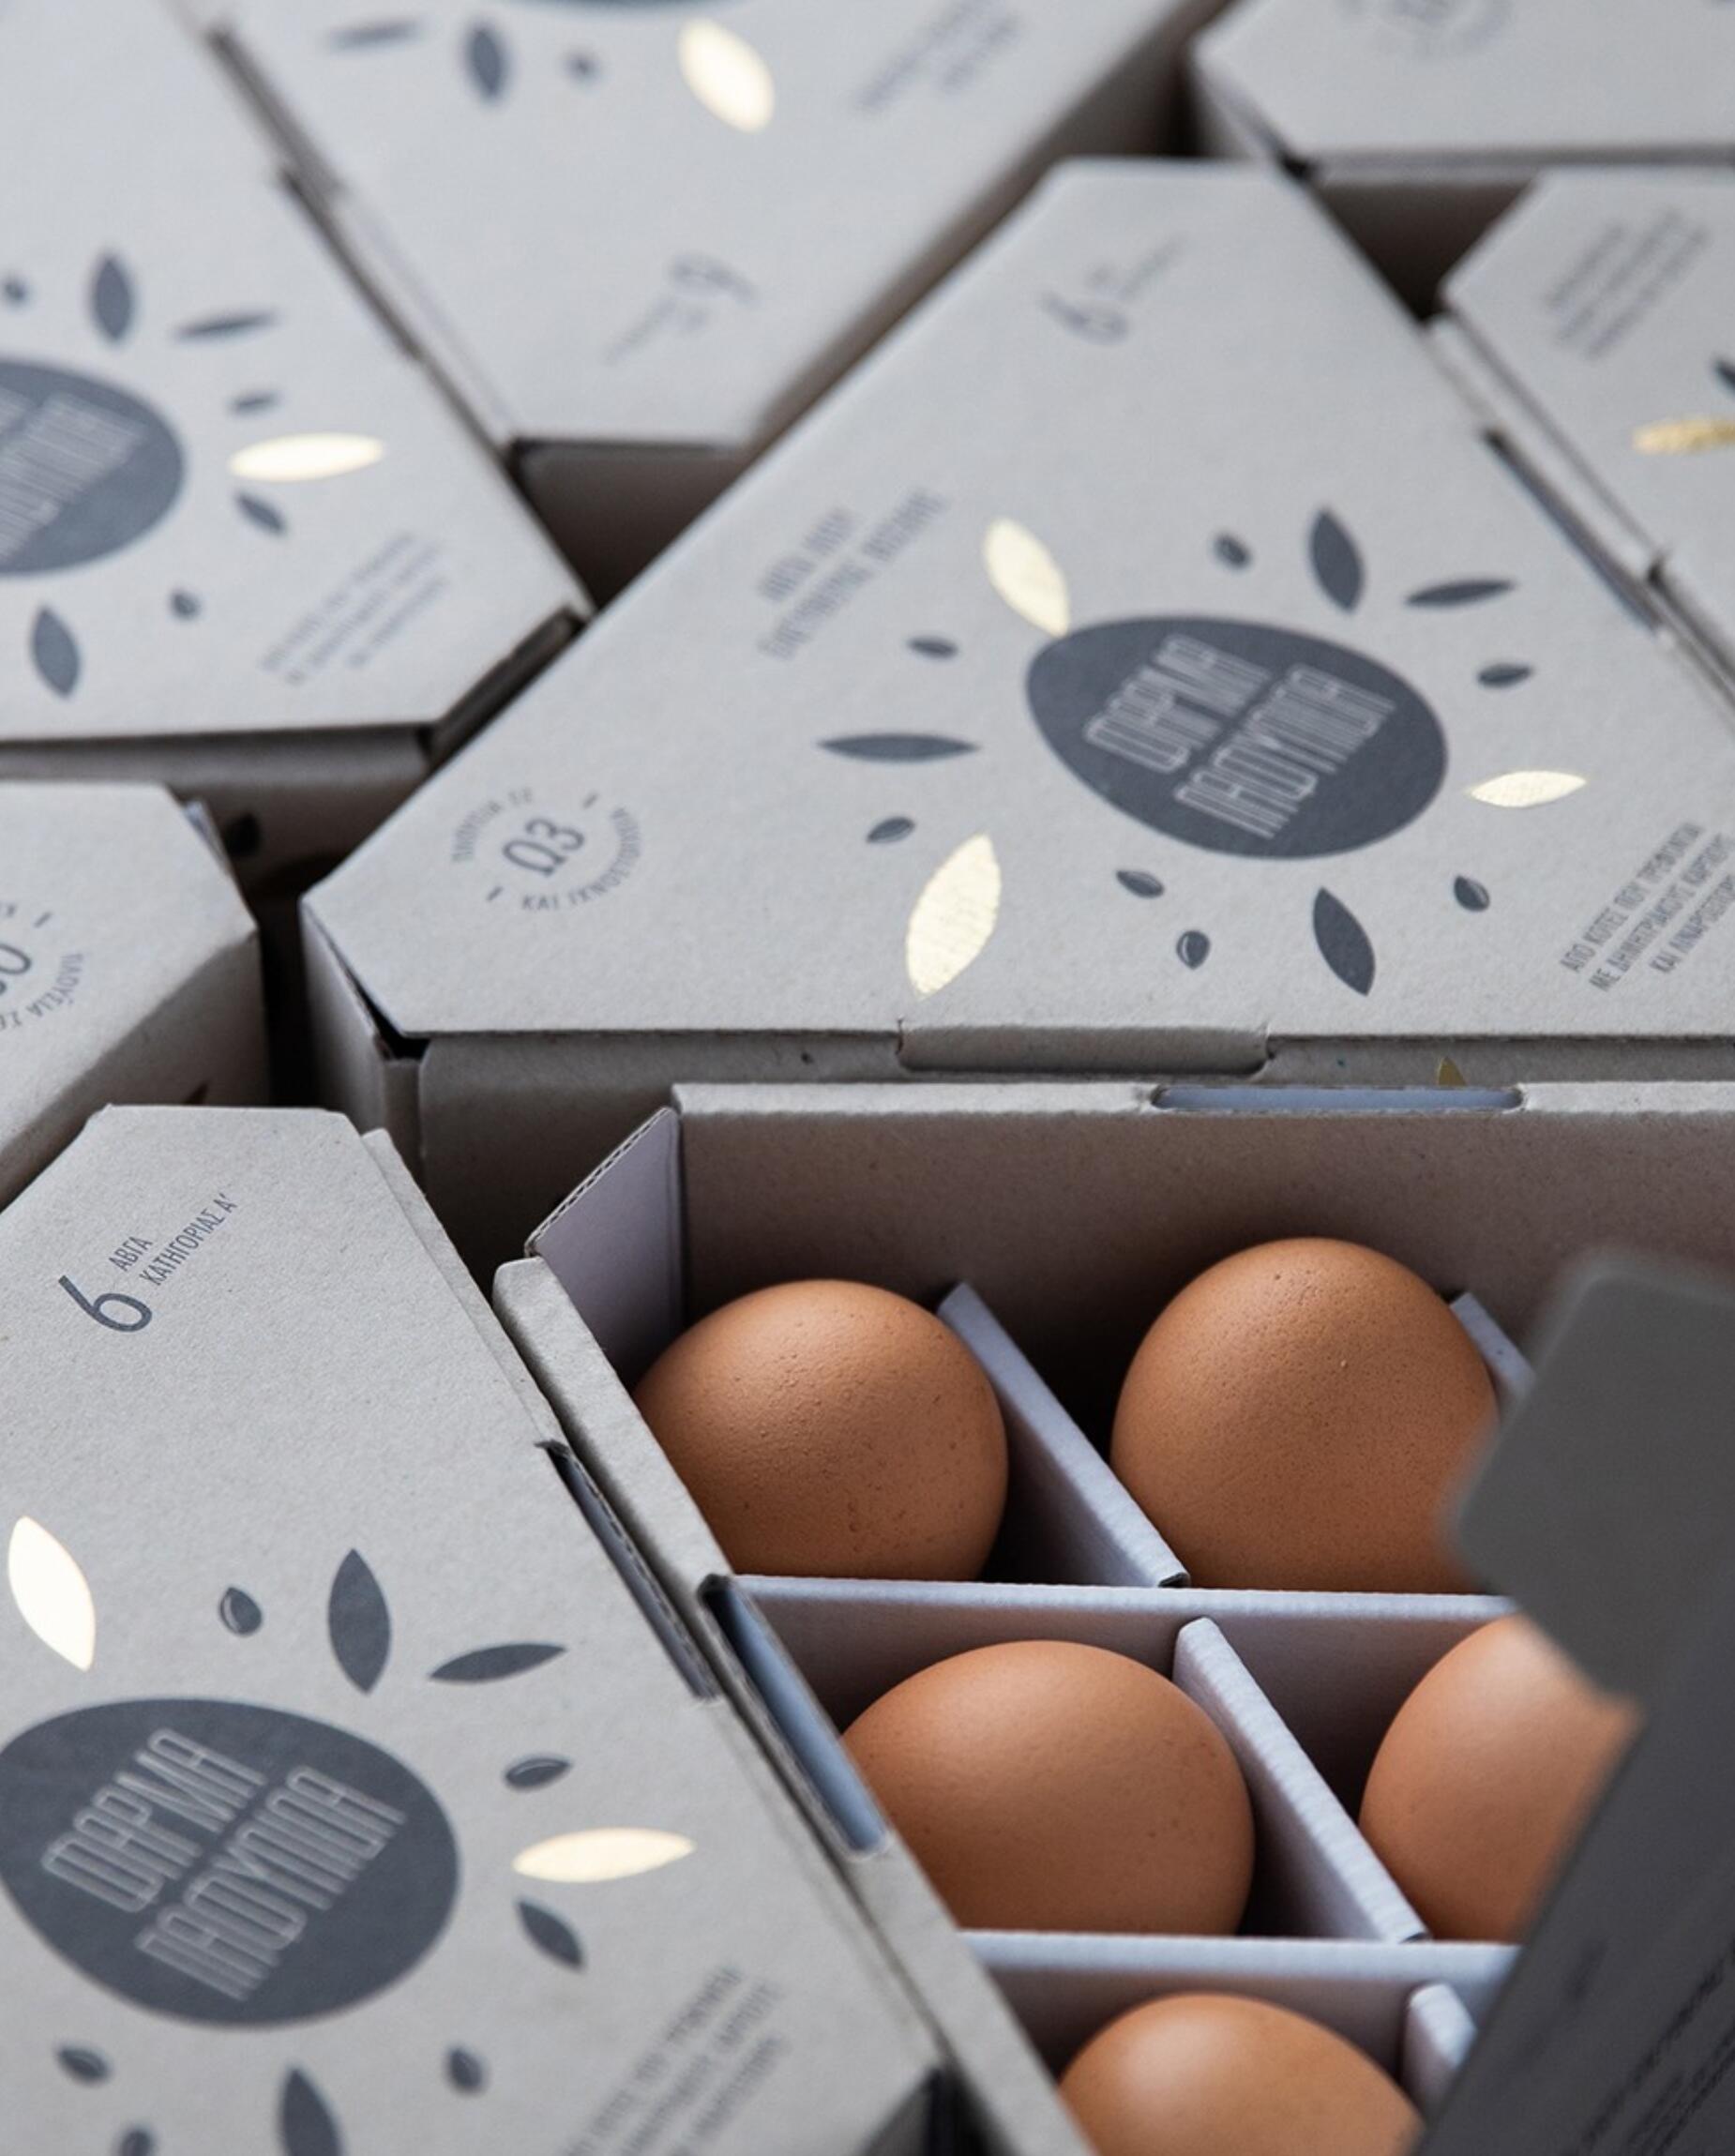 Application of Eco-friendly Materials in Food Packaging Design